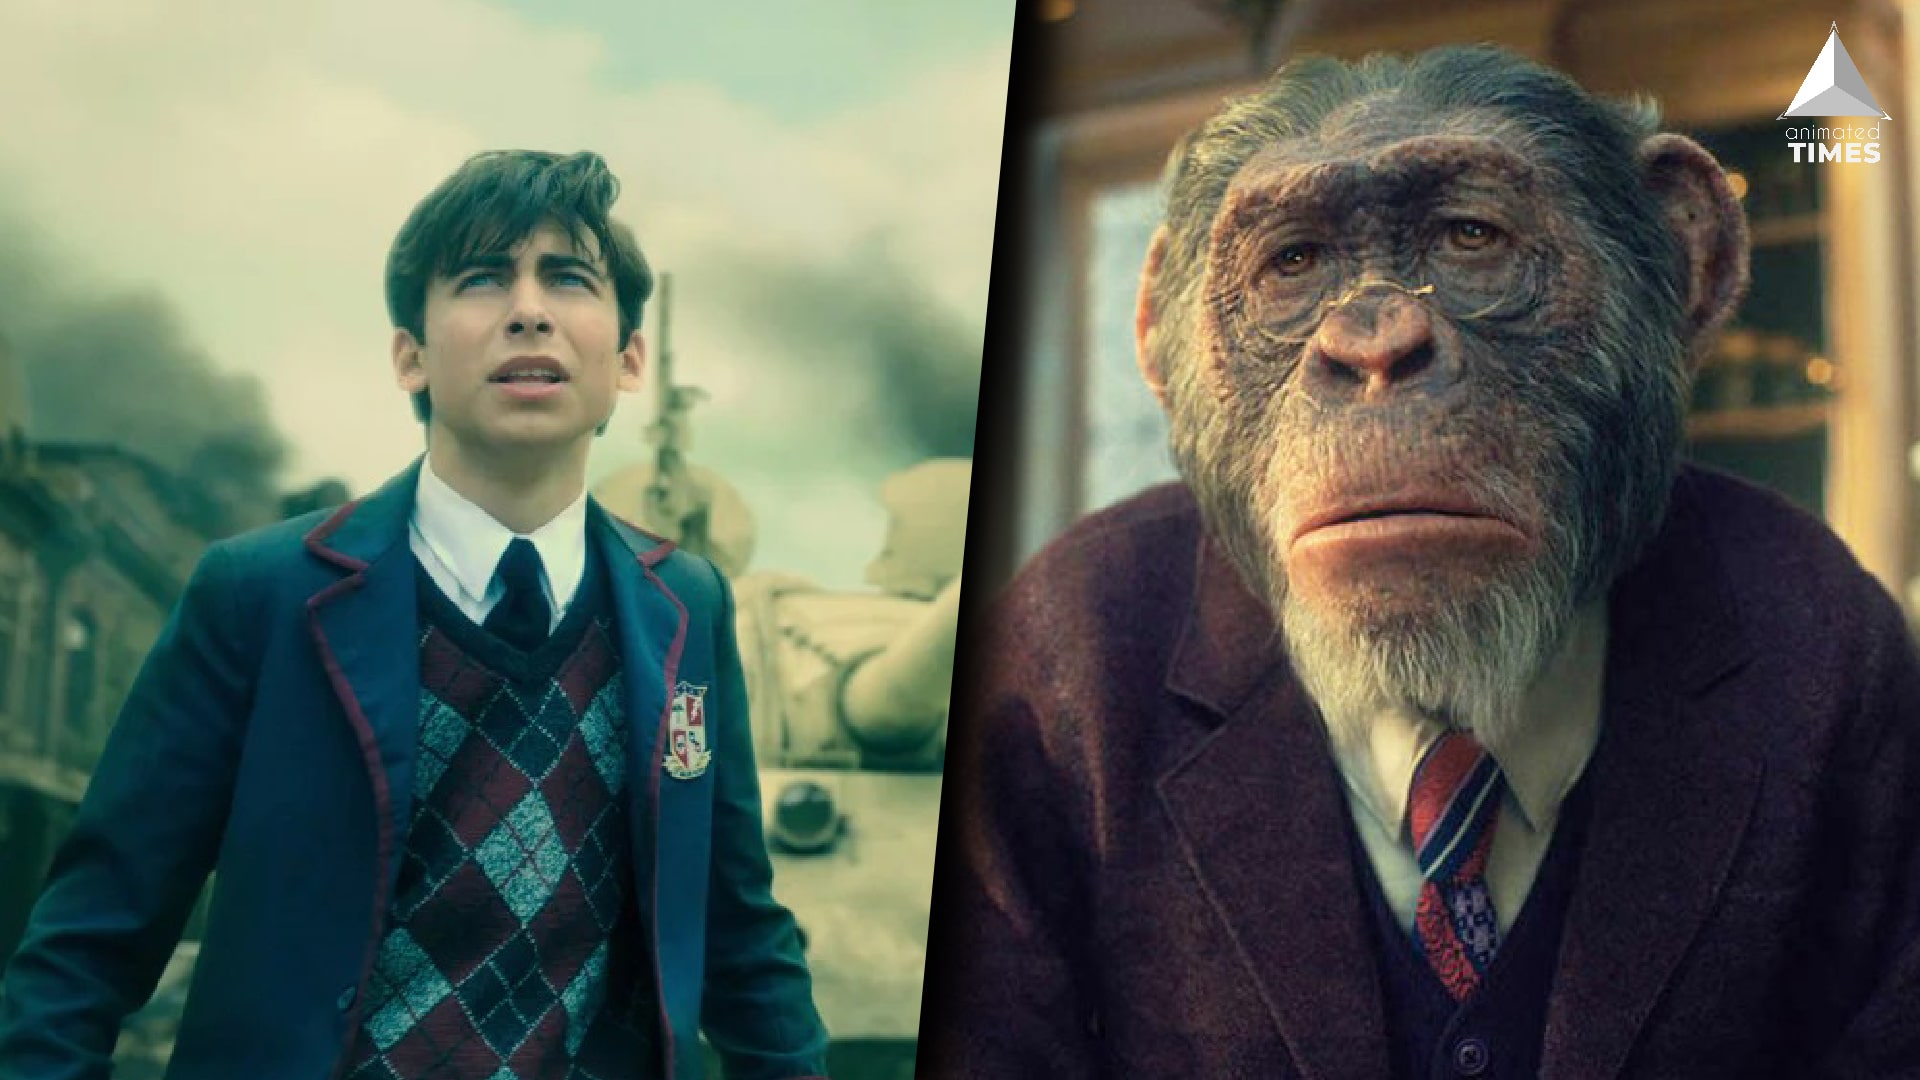 Umbrella Academy: 15 Mind-blowing Facts You Never Knew